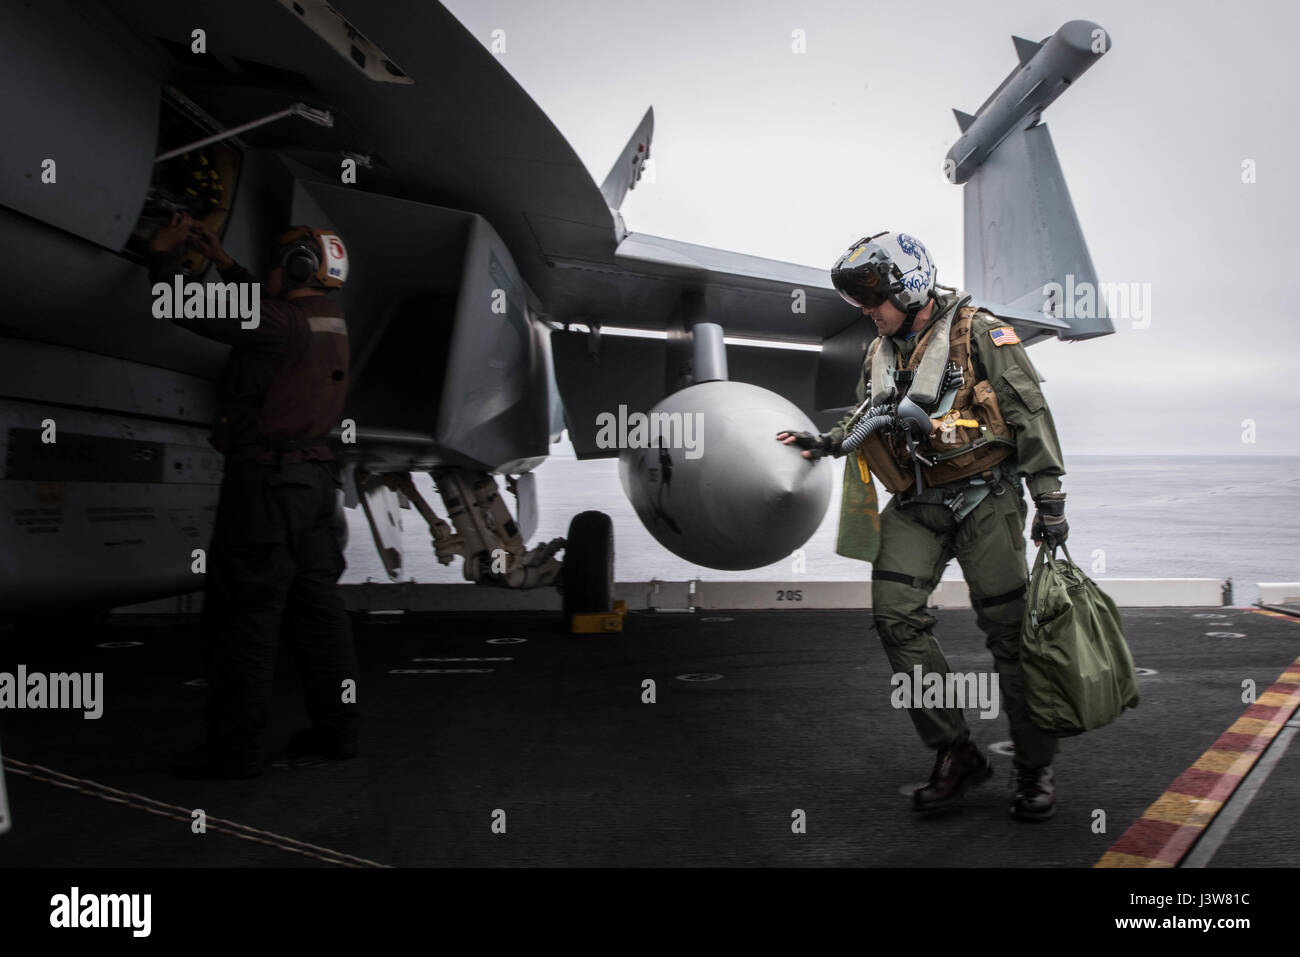 170503-N-MJ135-443  PACIFIC OCEAN (May 3, 2017) Cmdr. Ladislao Montero, executive officer of the 'Cougars' of Electronic Attack Strike Squadron (VAQ) 139, performs his pre-flight inspections on an EA-18G Growler aboard the aircraft carrier USS Theodore Roosevelt (CVN 71) during a group sail training unit exercise. The exercise is the first step in the ship's integrated training phase and aims to enhance mission-readiness and warfighting capabilities between the ship, airwing and the staff through simulated real-world scenarios. (U.S. Navy Photo by Mass Communication Specialist 3rd Class Spence Stock Photo